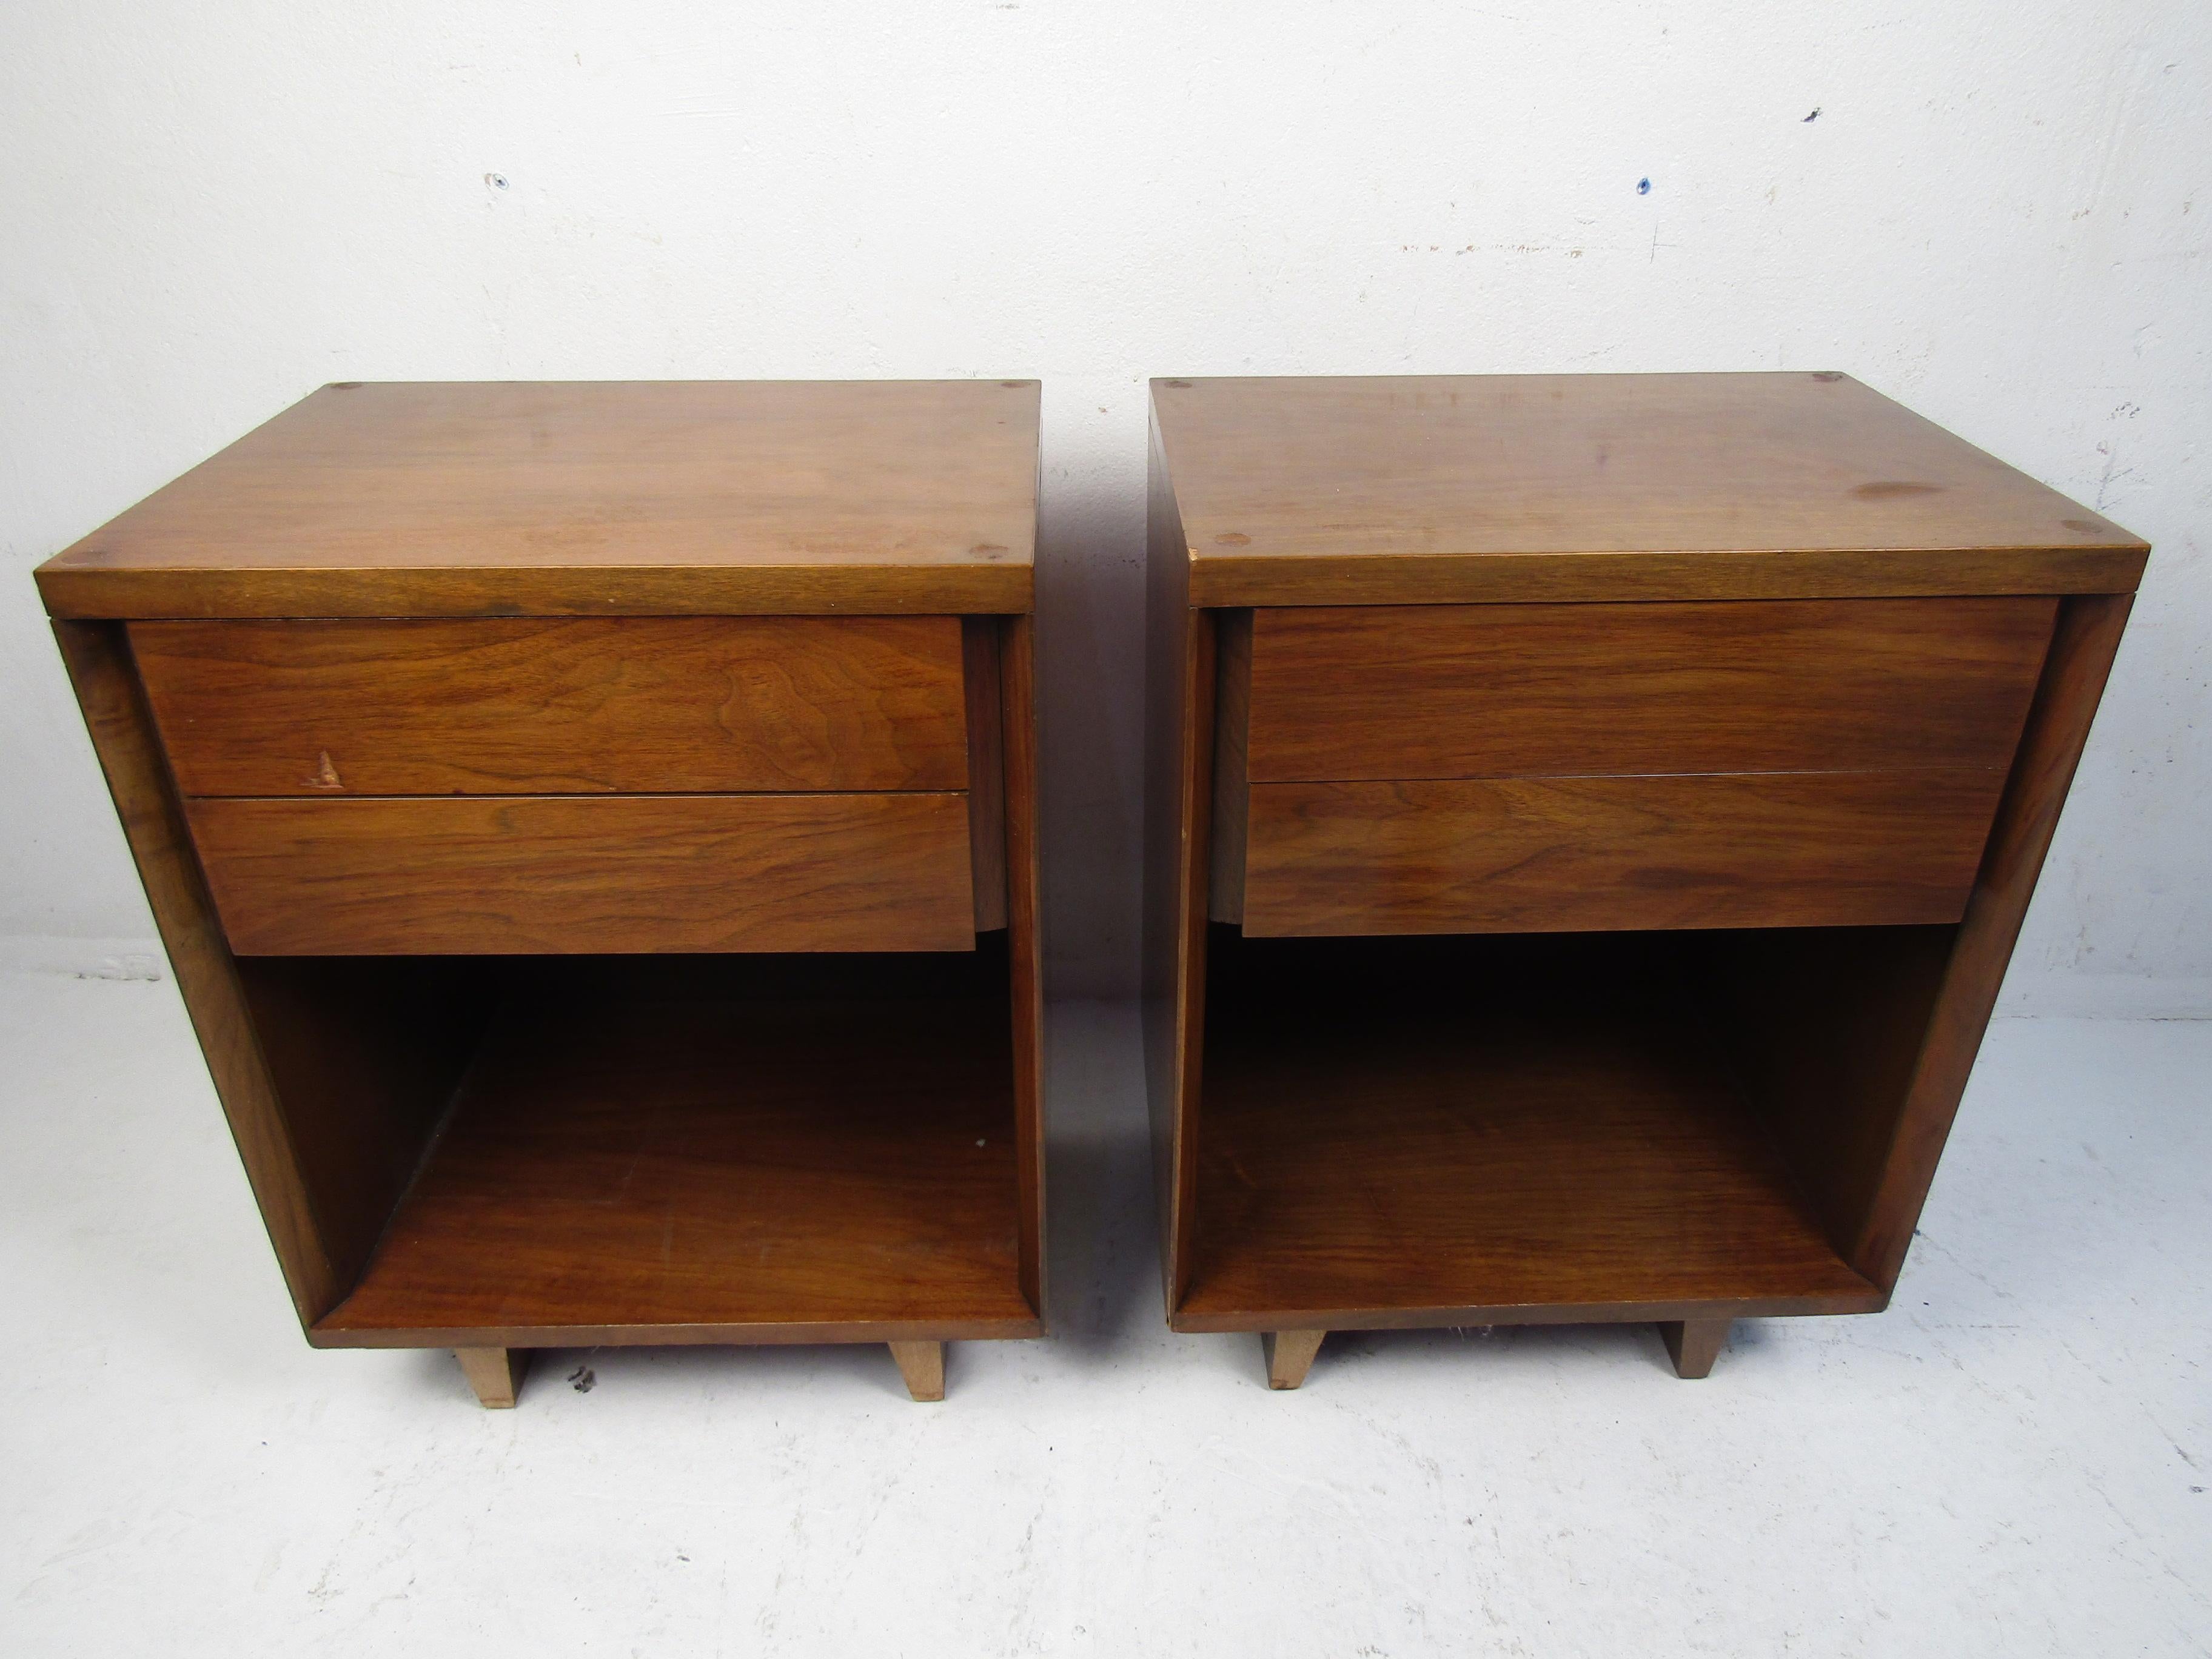 Stylish midcentury nightstands sold by John Stuart. Two dovetail jointed drawers on each, with open storage space beneath. Please confirm item location with dealer (NJ or NY).